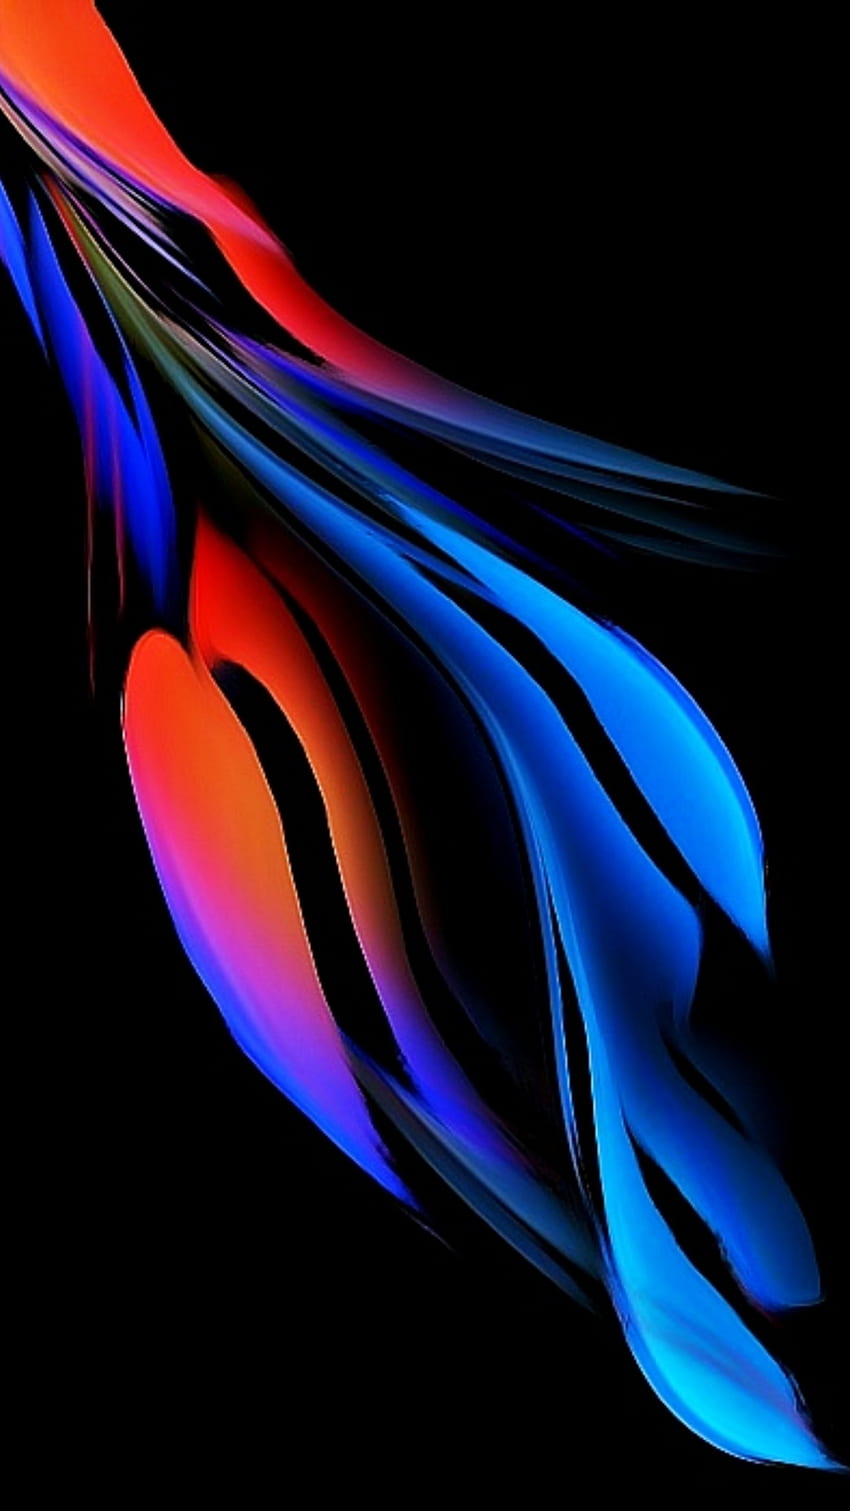 dsaewse, digital, electric blue, new, neon, texture, cool, pattern, abstract, graphics, flower, red, amoled, samsung, modern, , design, galaxy HD phone wallpaper